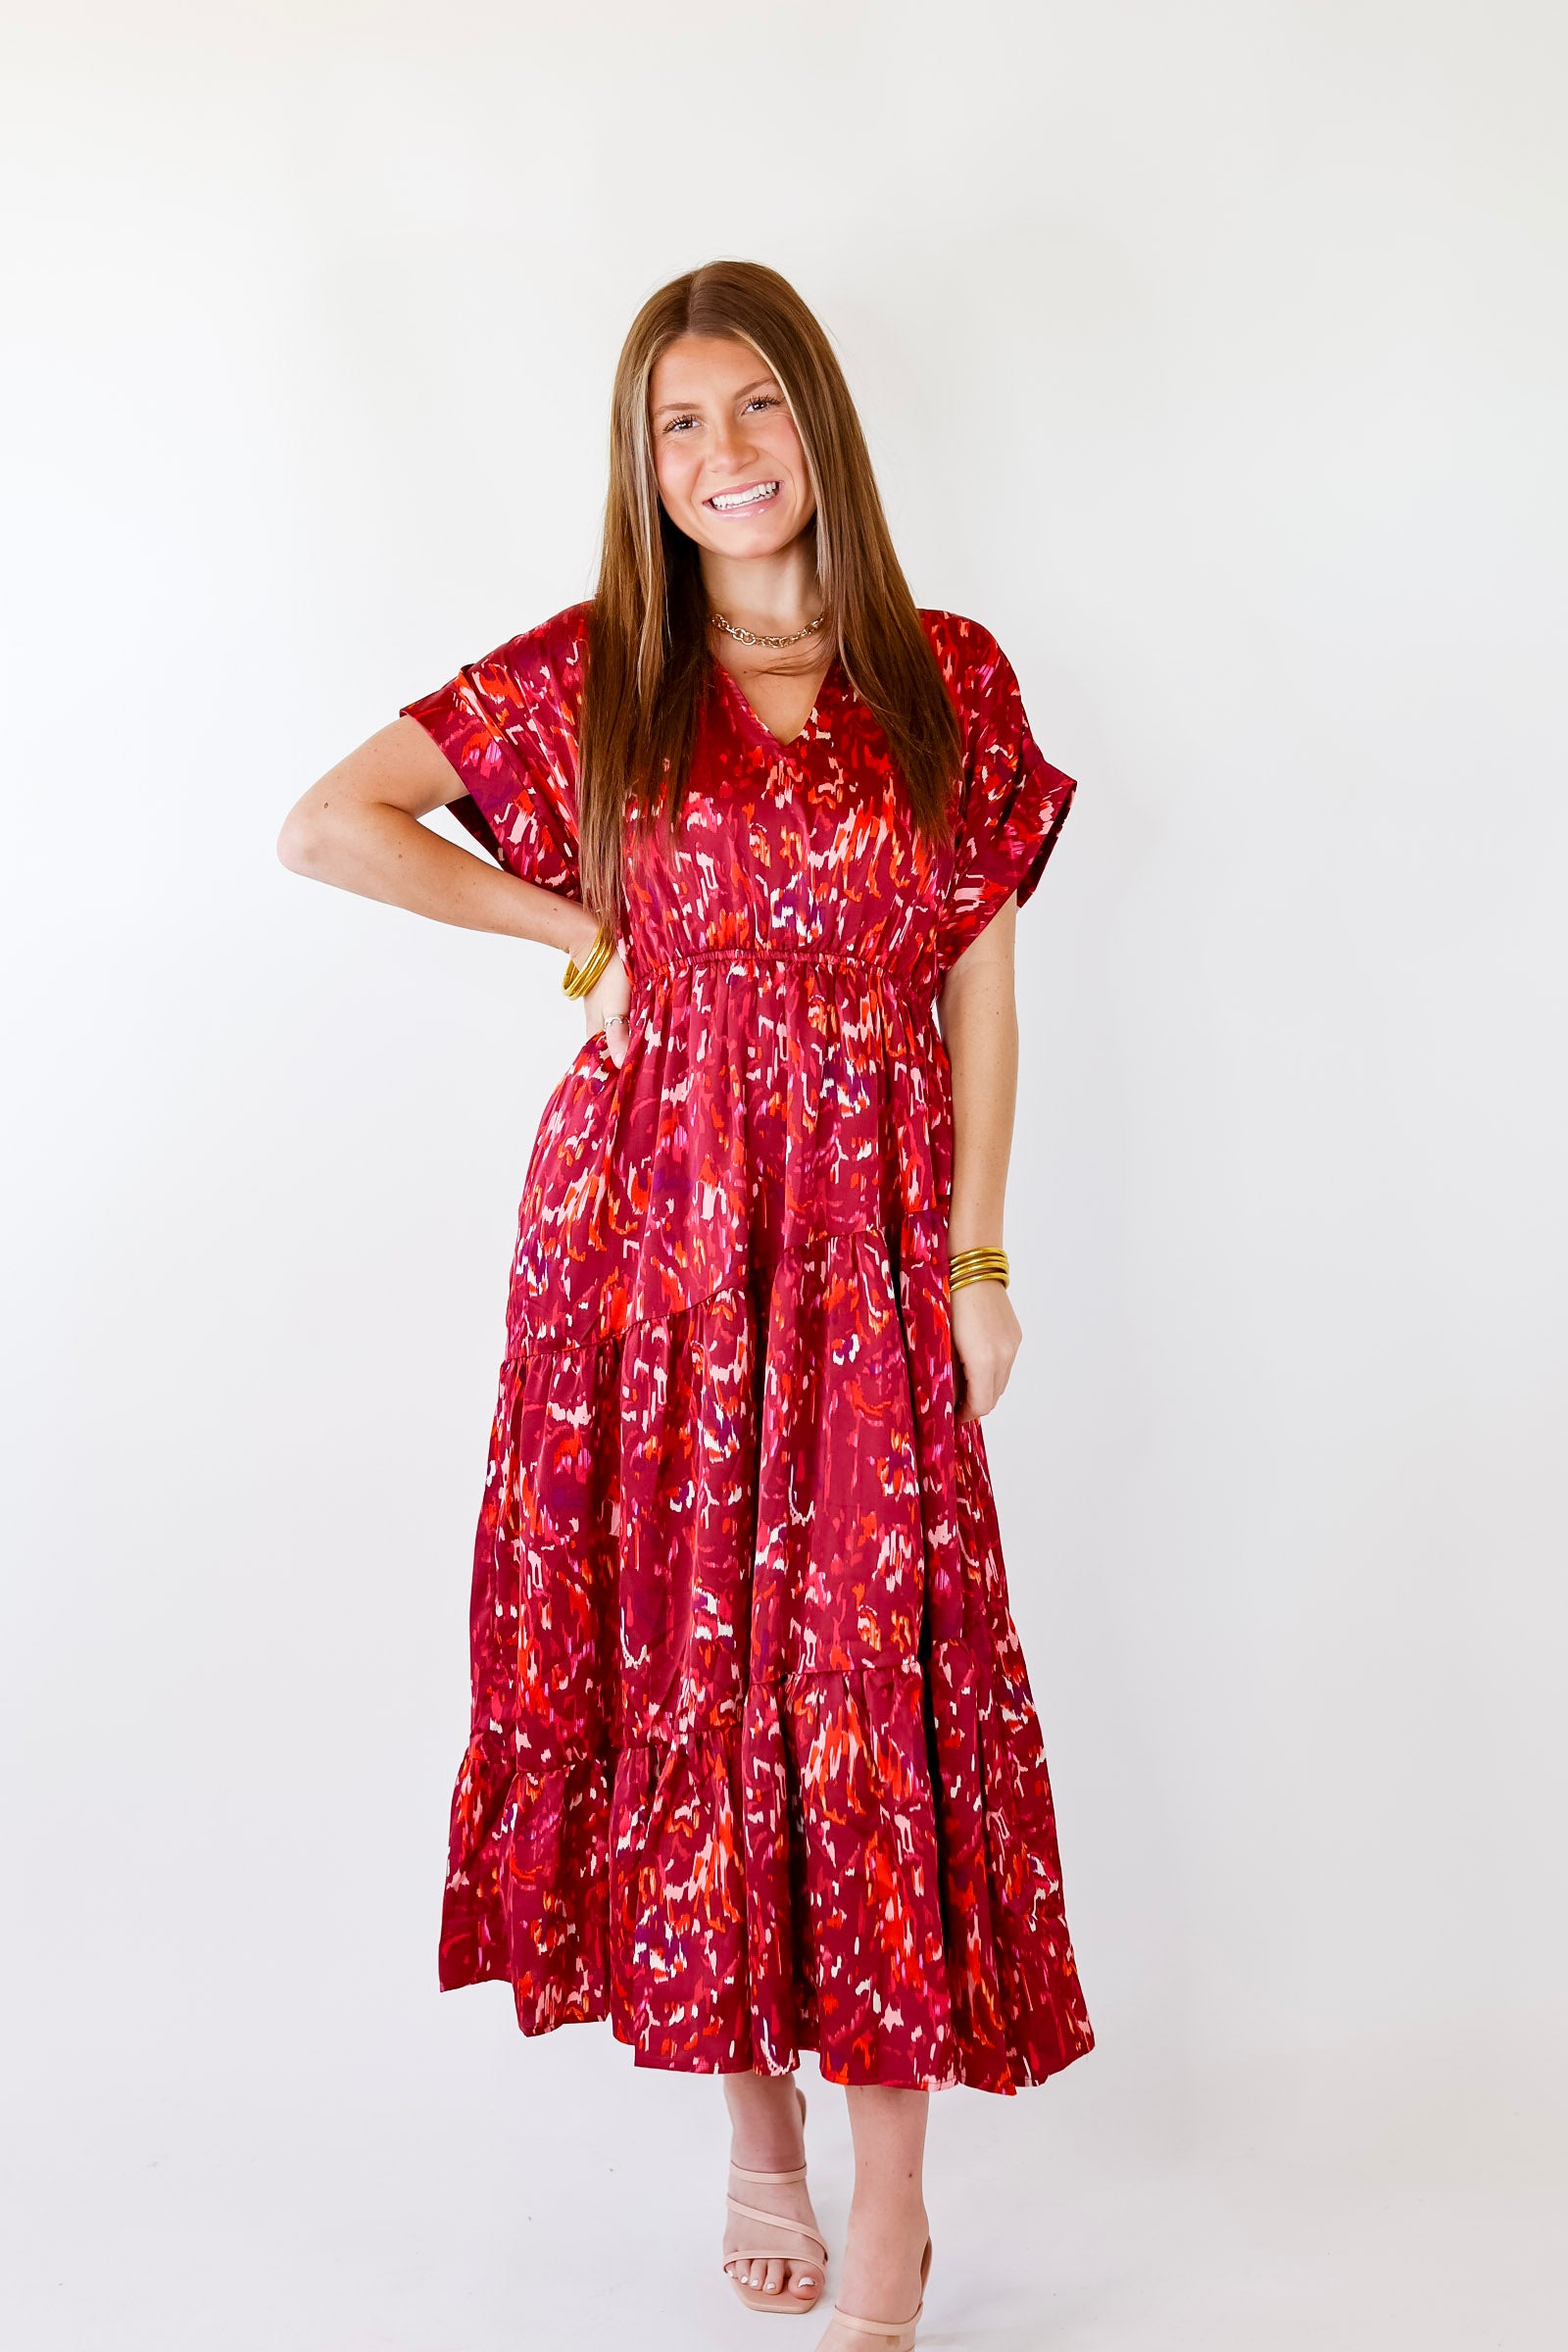 Burnin' Up Multicolor Abstract Midi Dress in Wine Red - Giddy Up Glamour Boutique